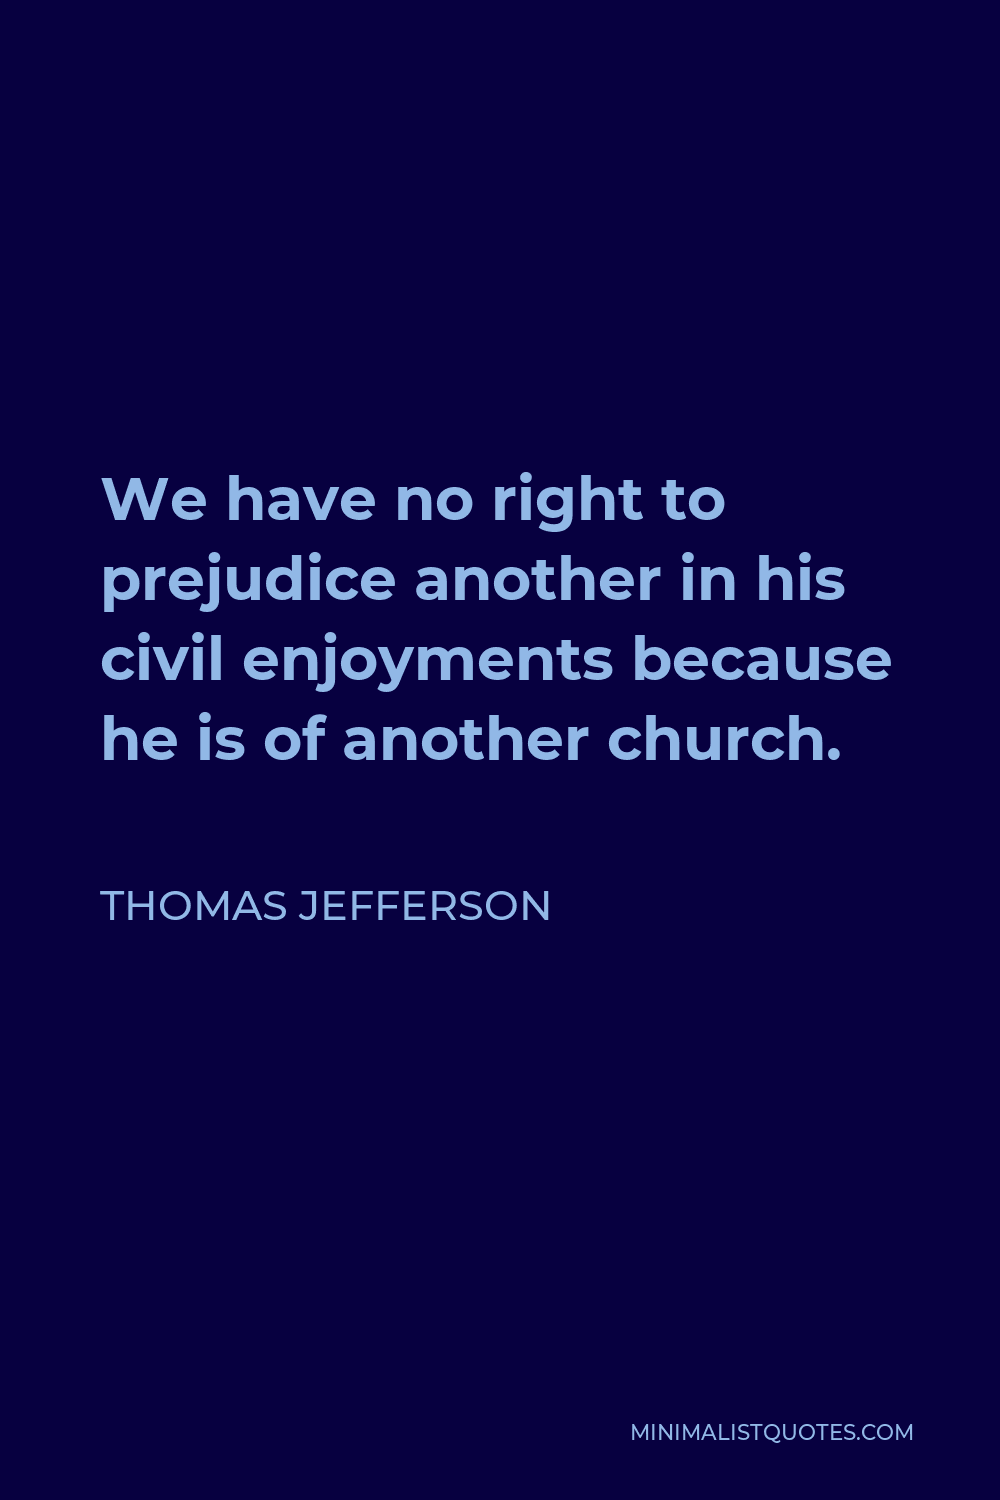 Thomas Jefferson Quote - We have no right to prejudice another in his civil enjoyments because he is of another church.